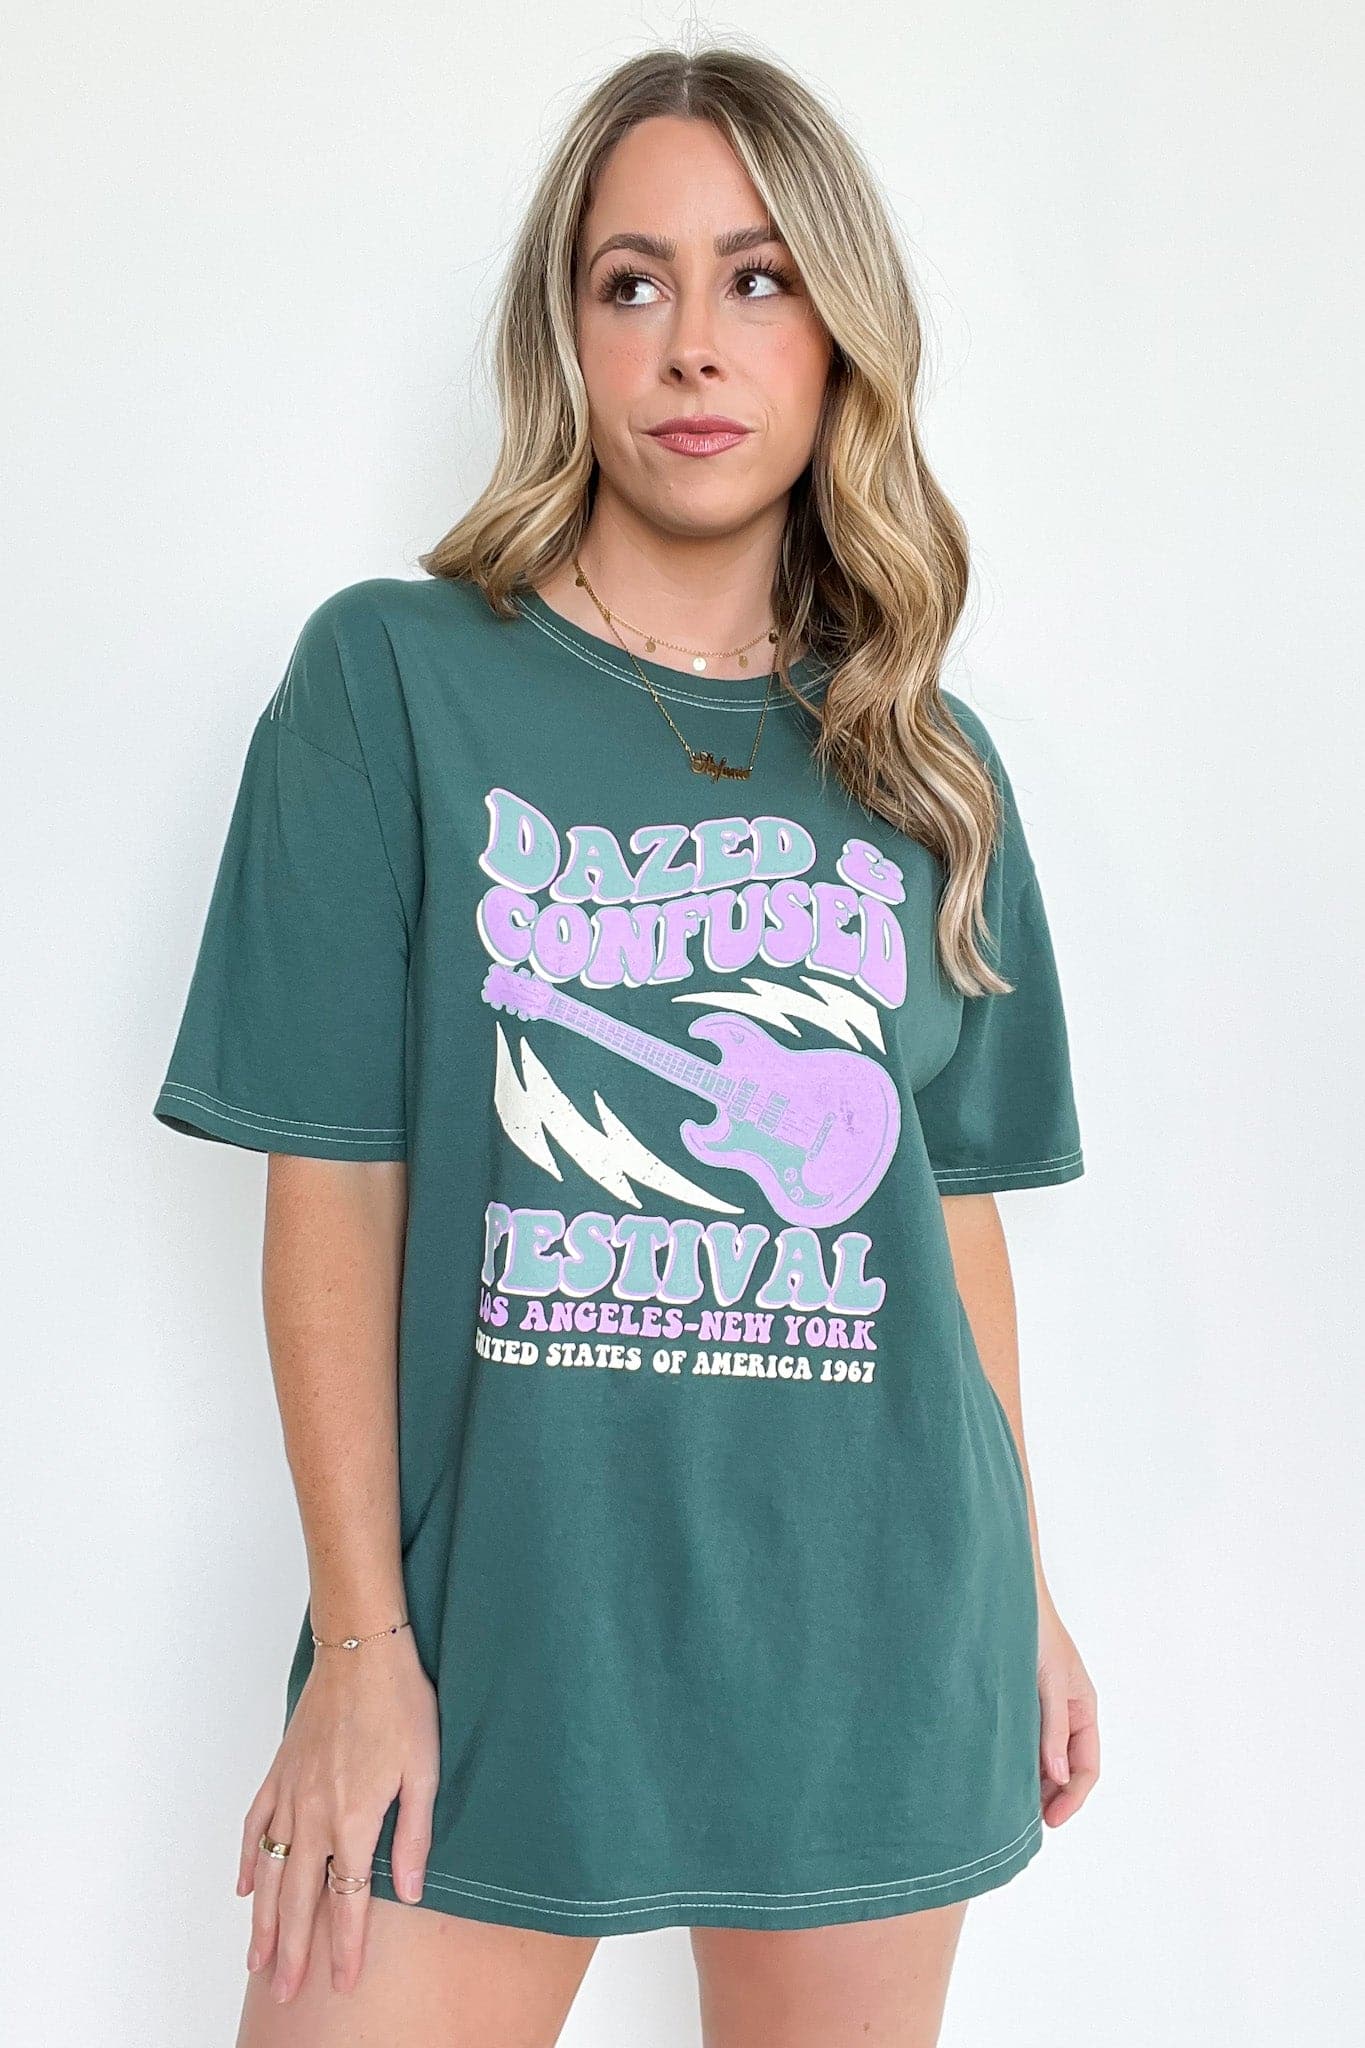  Dazed & Confused Festival Oversized Vintage Graphic Tee - BACK IN STOCK - Madison and Mallory